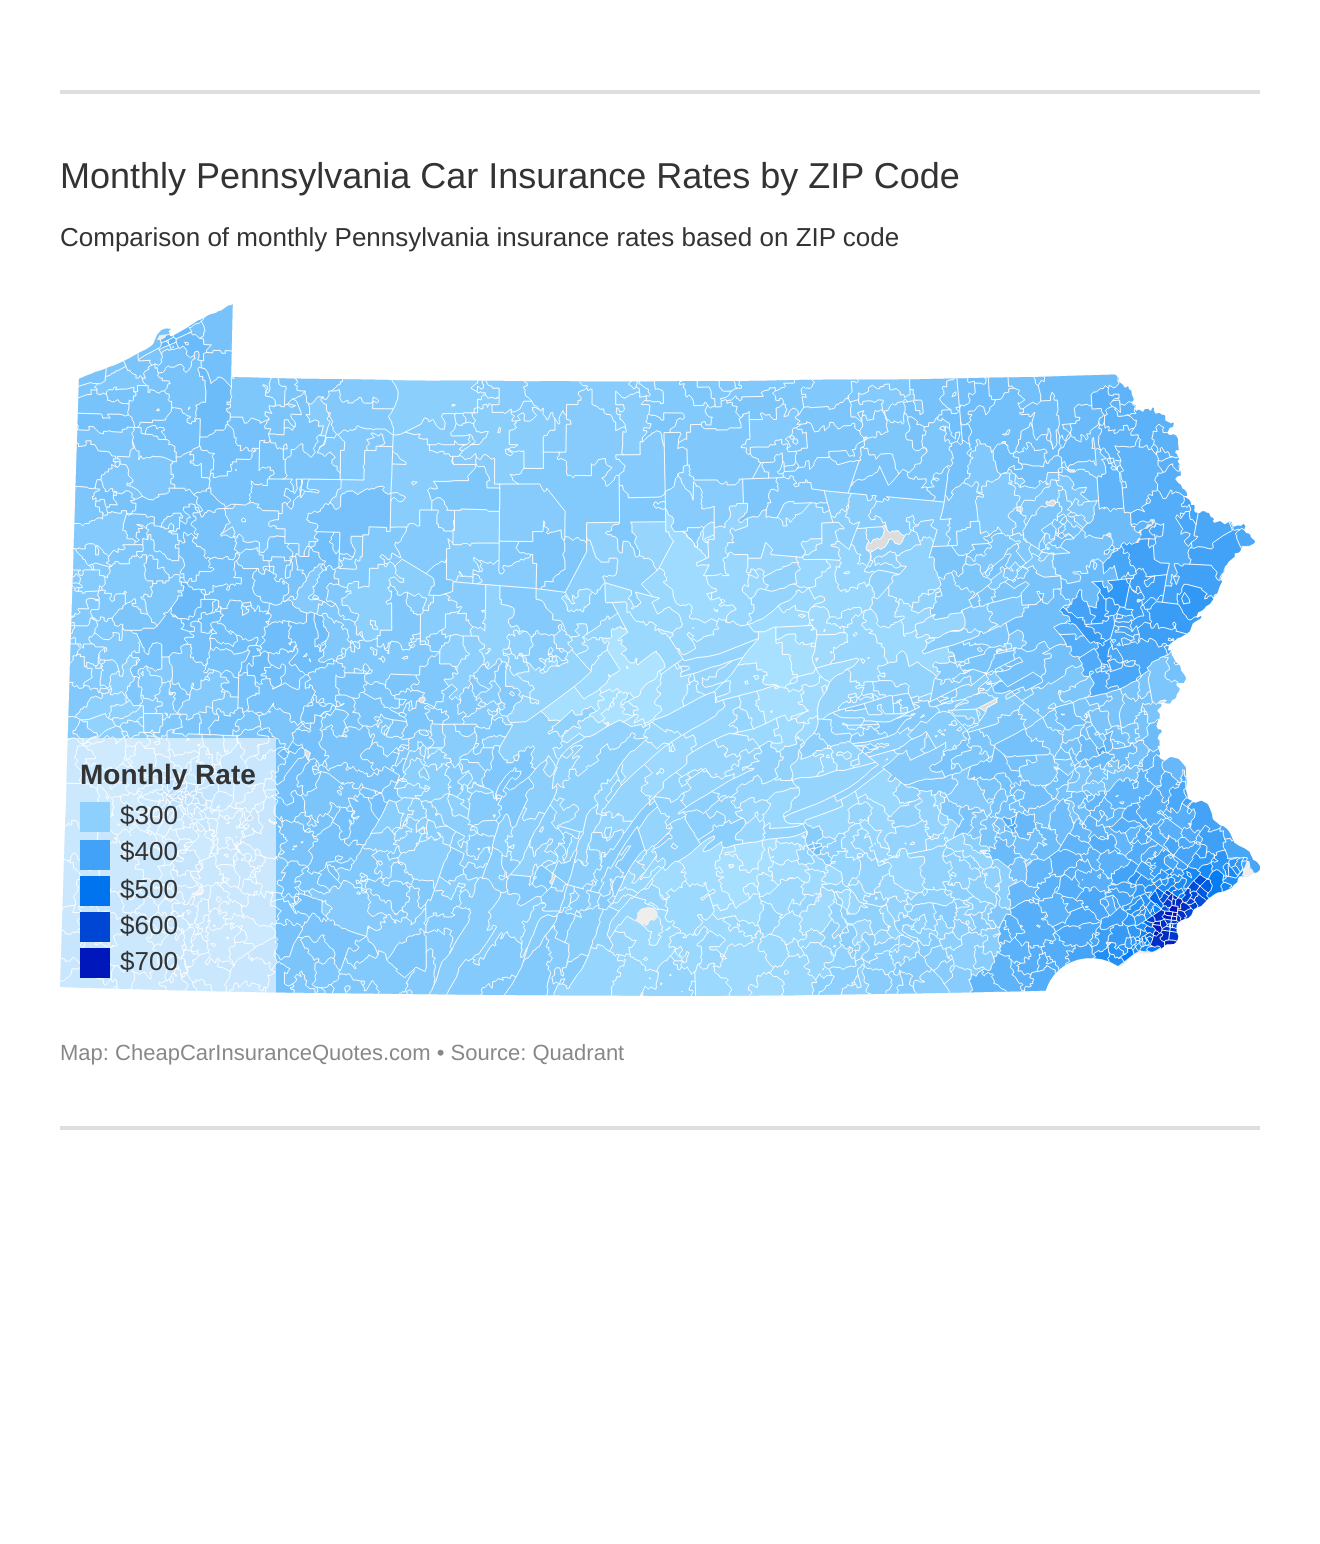 Monthly Pennsylvania Car Insurance Rates by ZIP Code